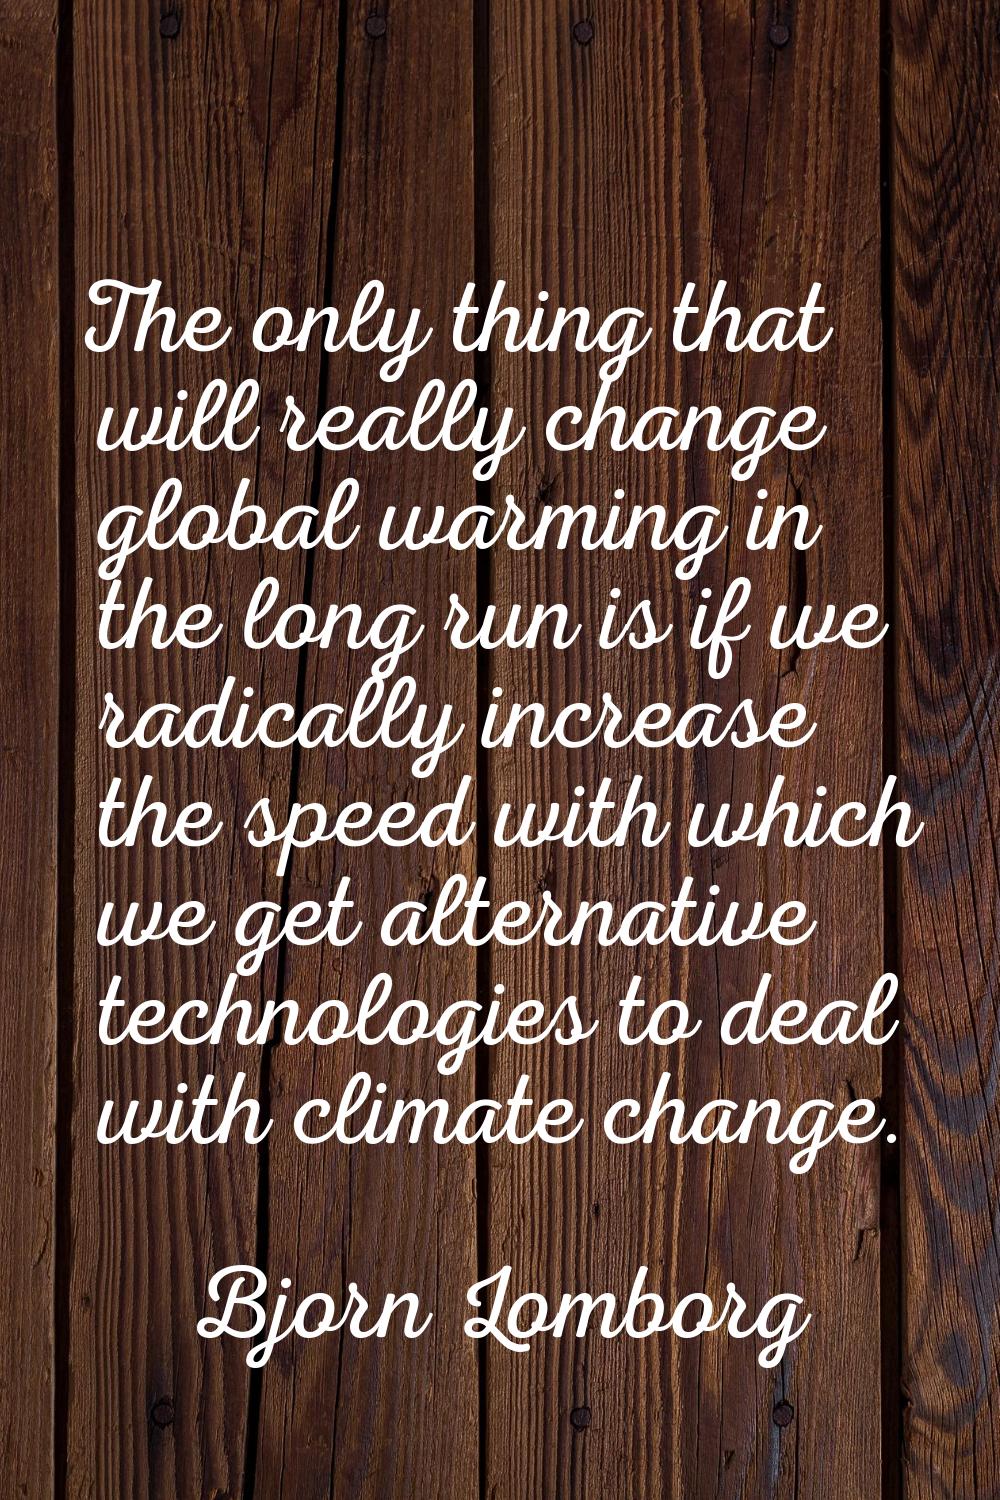 The only thing that will really change global warming in the long run is if we radically increase t